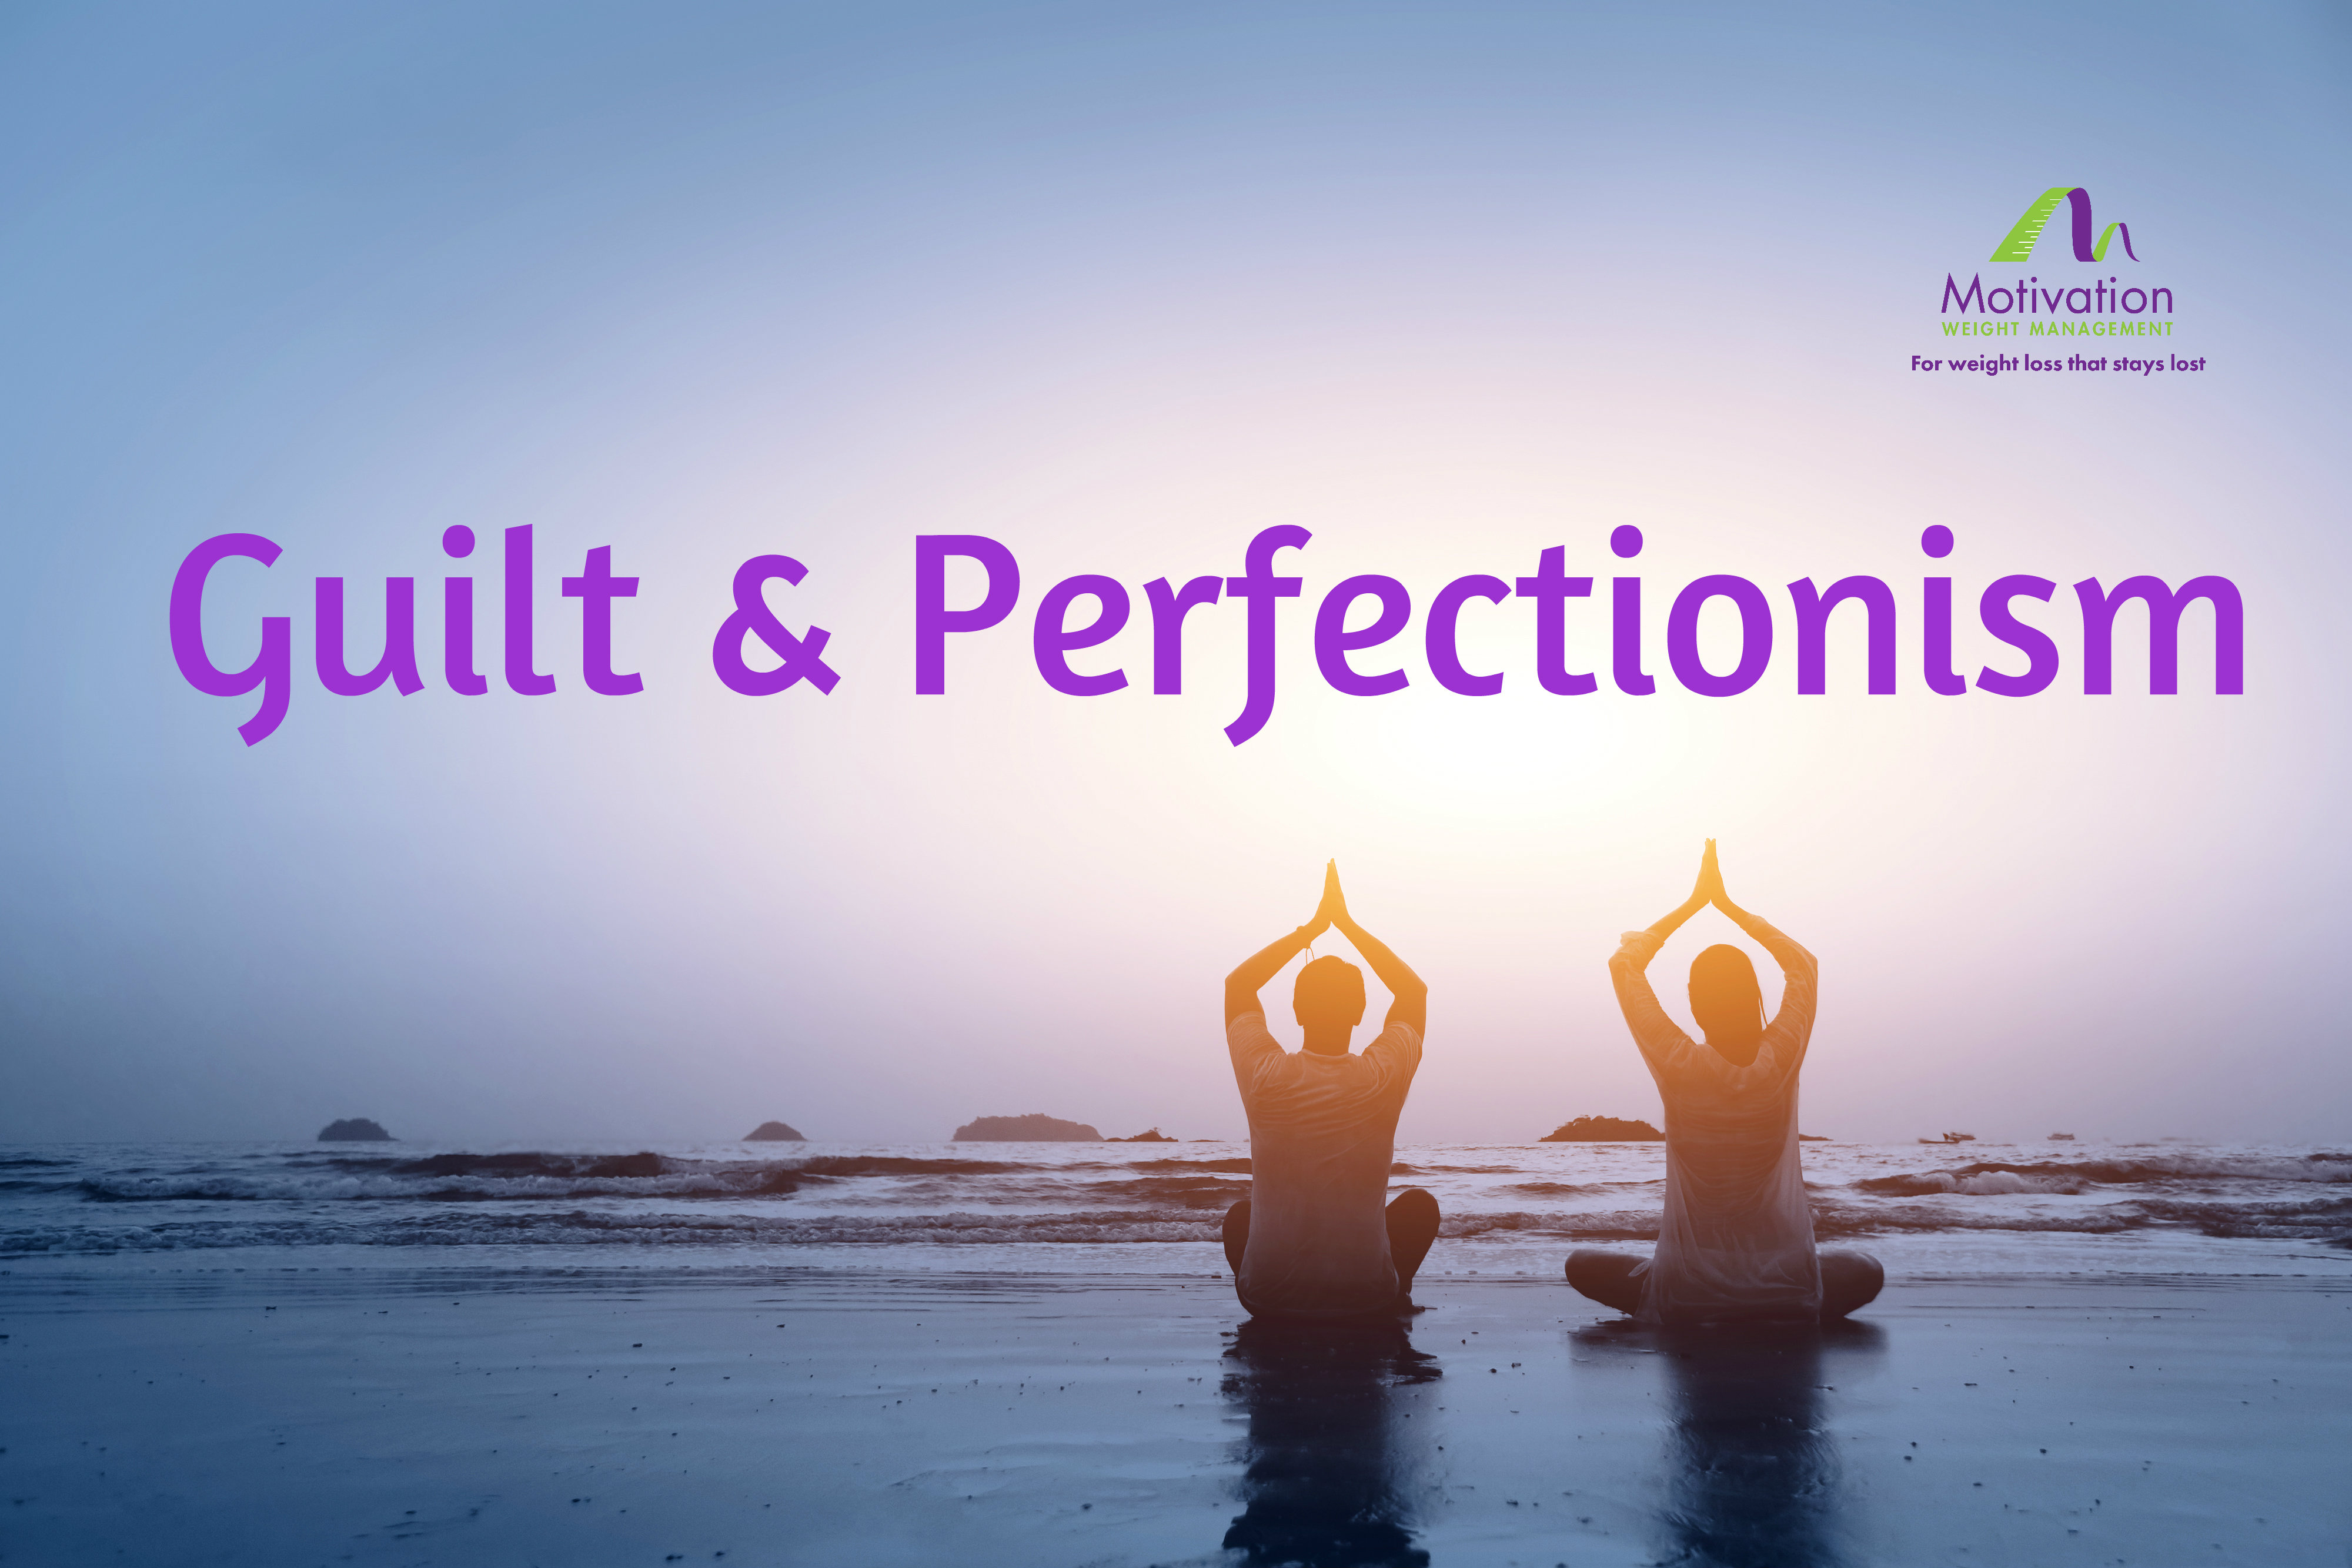 Day 13 Guilt & Perfectionism